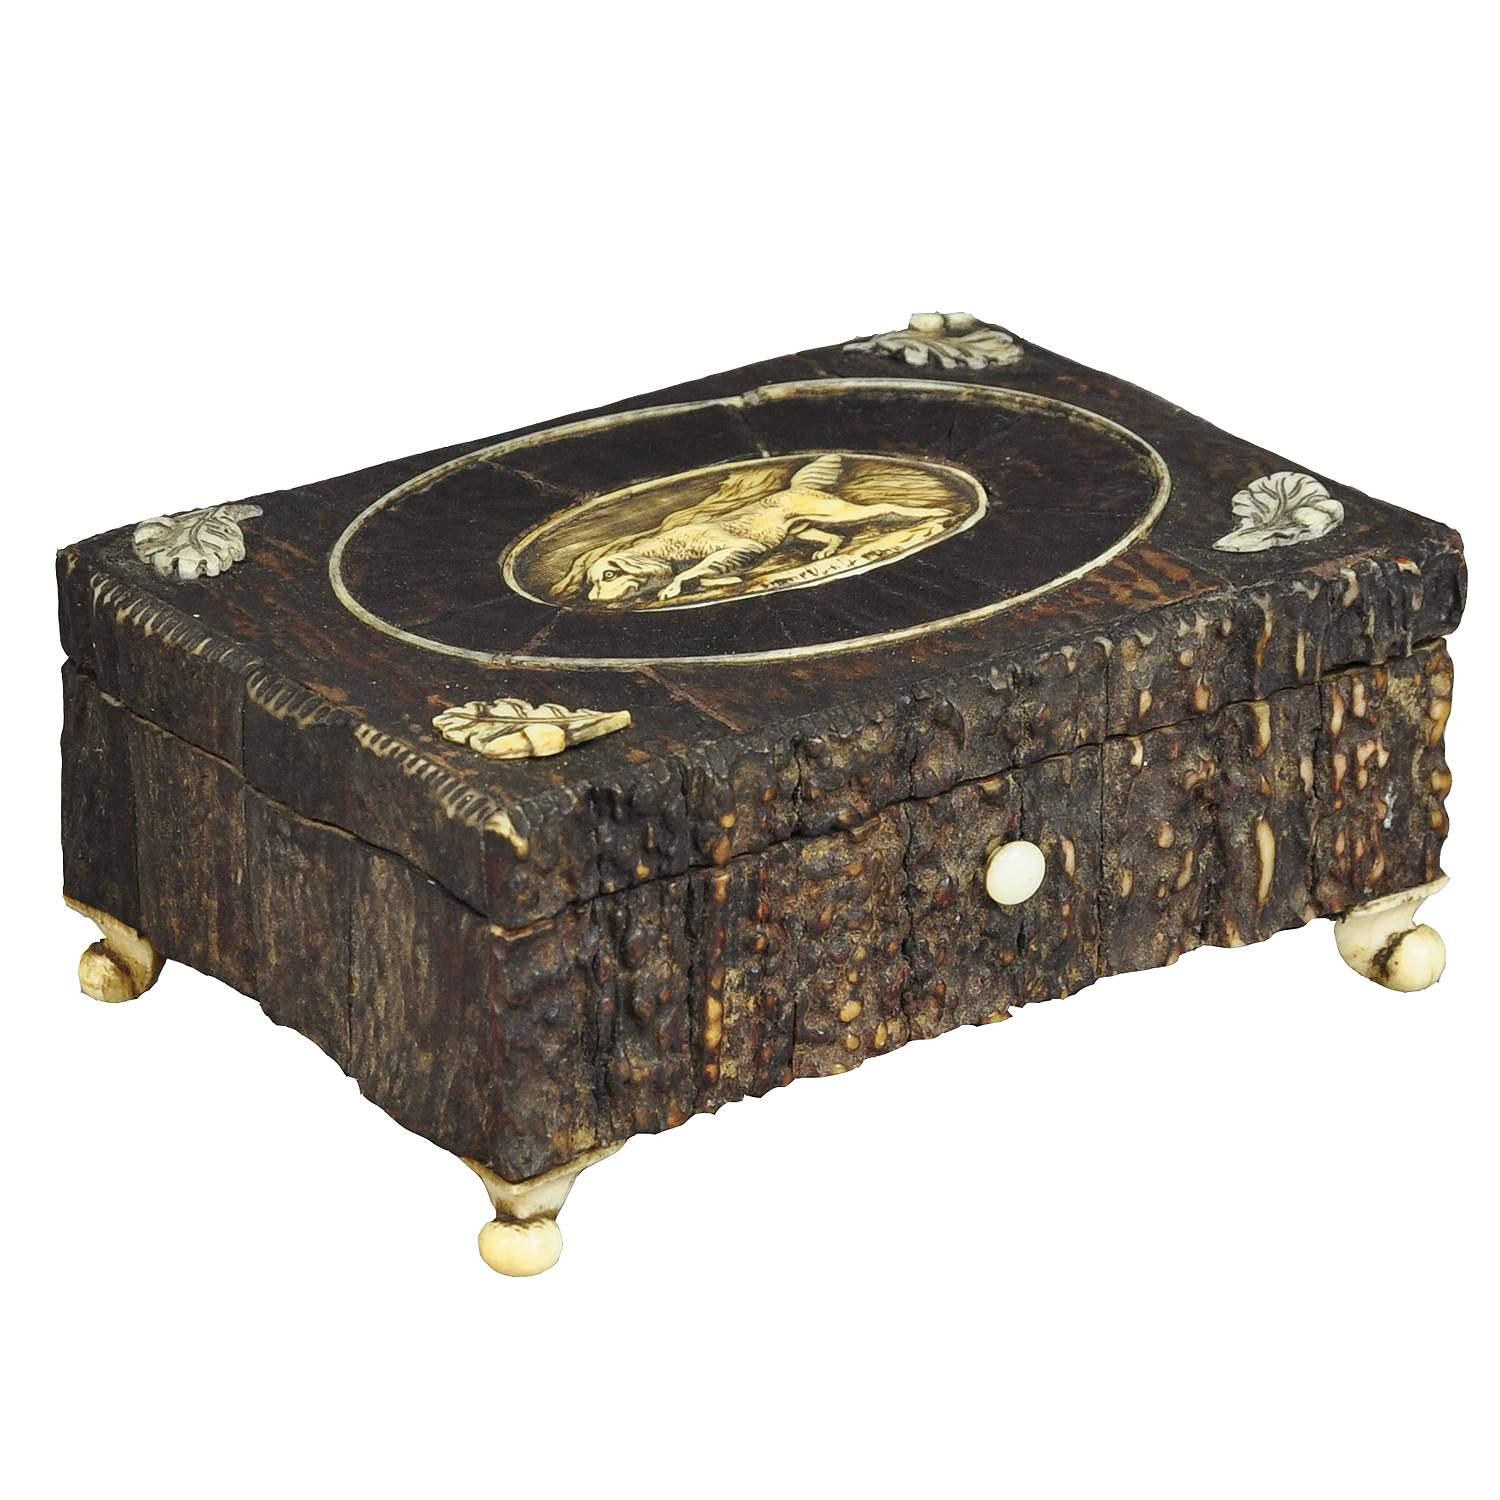 A marvelous antique rustic casket. It is made of wood, veneered with antler pieces. On top an antler plaque with staghound carving. The feet are made of antlers too. Executed ca. 1860. (veneer partly restored)

Measures: 
Width: 4.92